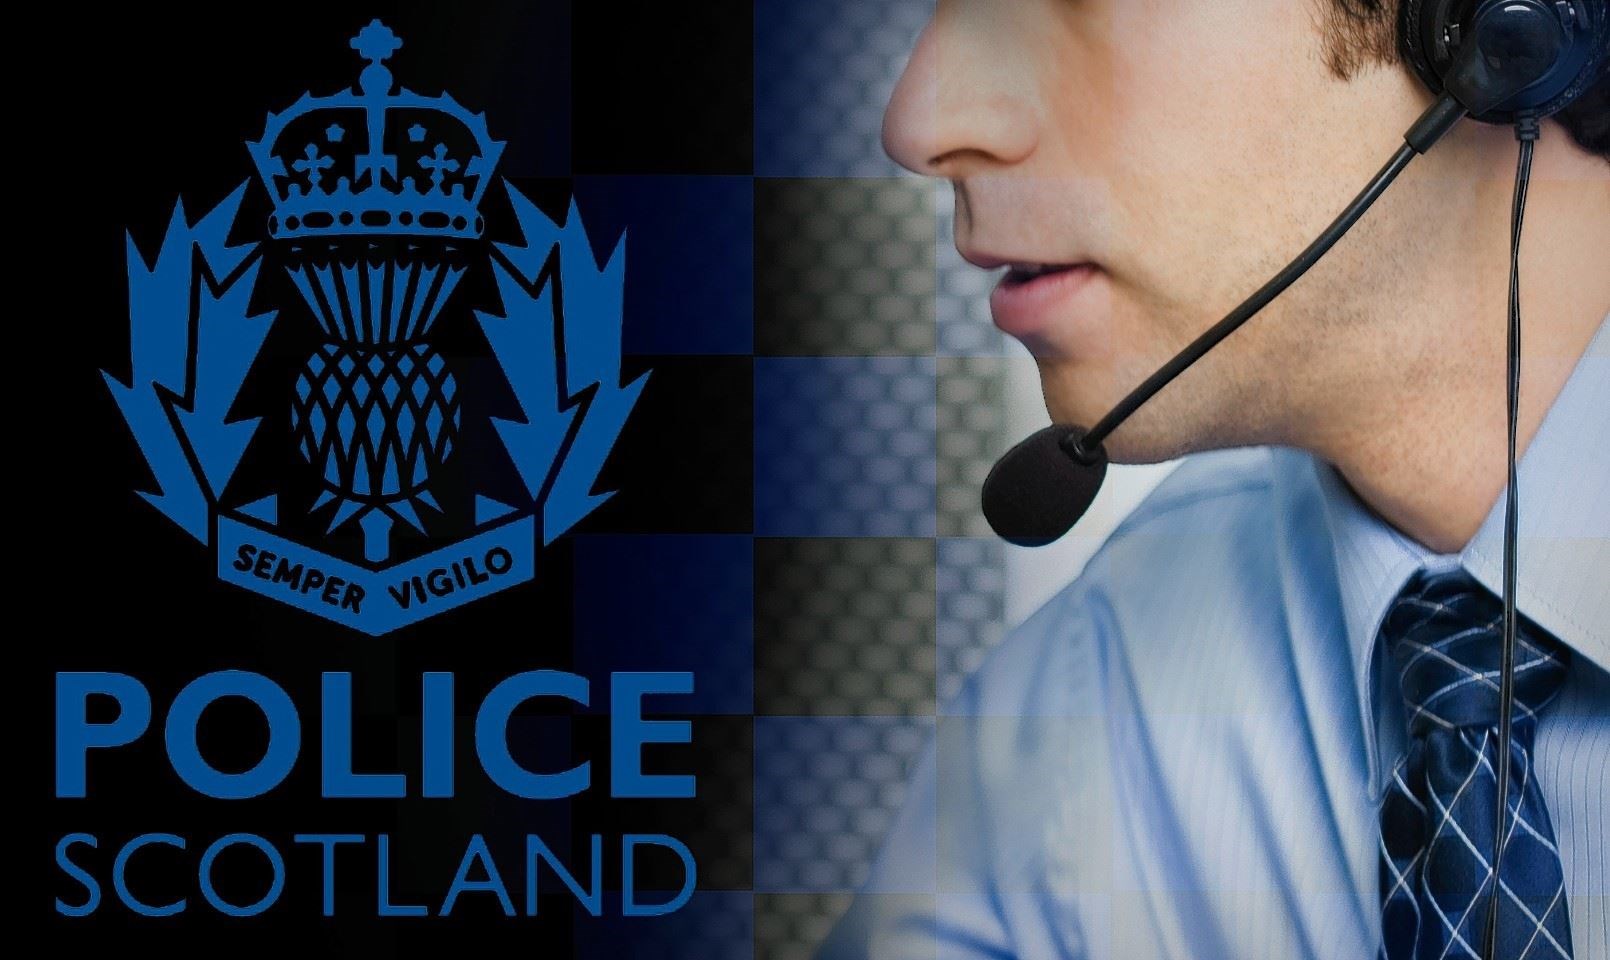 Police Scotland has urged people to call them on 101 if they notice anything suspicious or have information about the thieves.